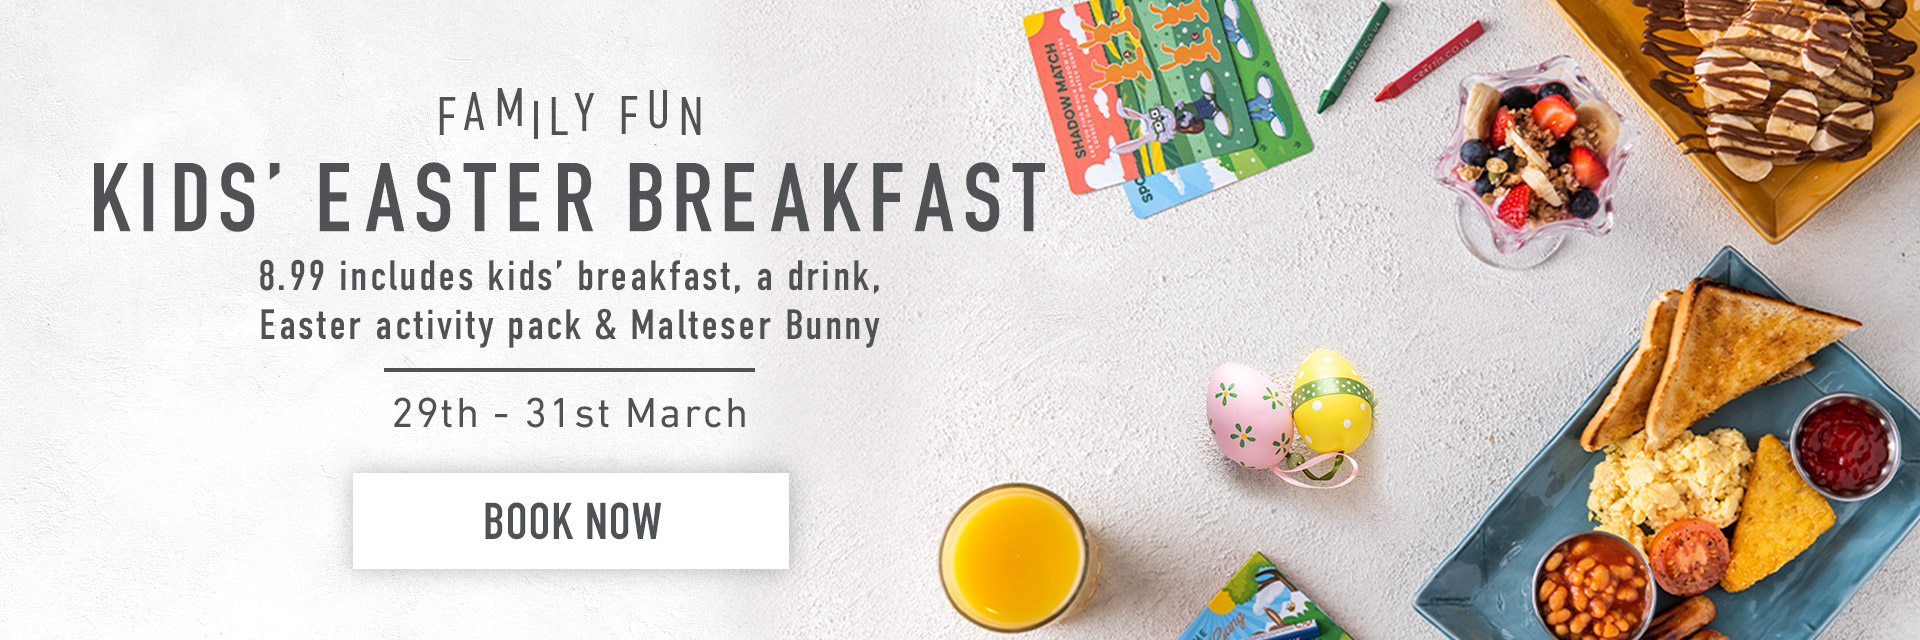 Kids Easter Breakfast at The Cricketers in Croydon